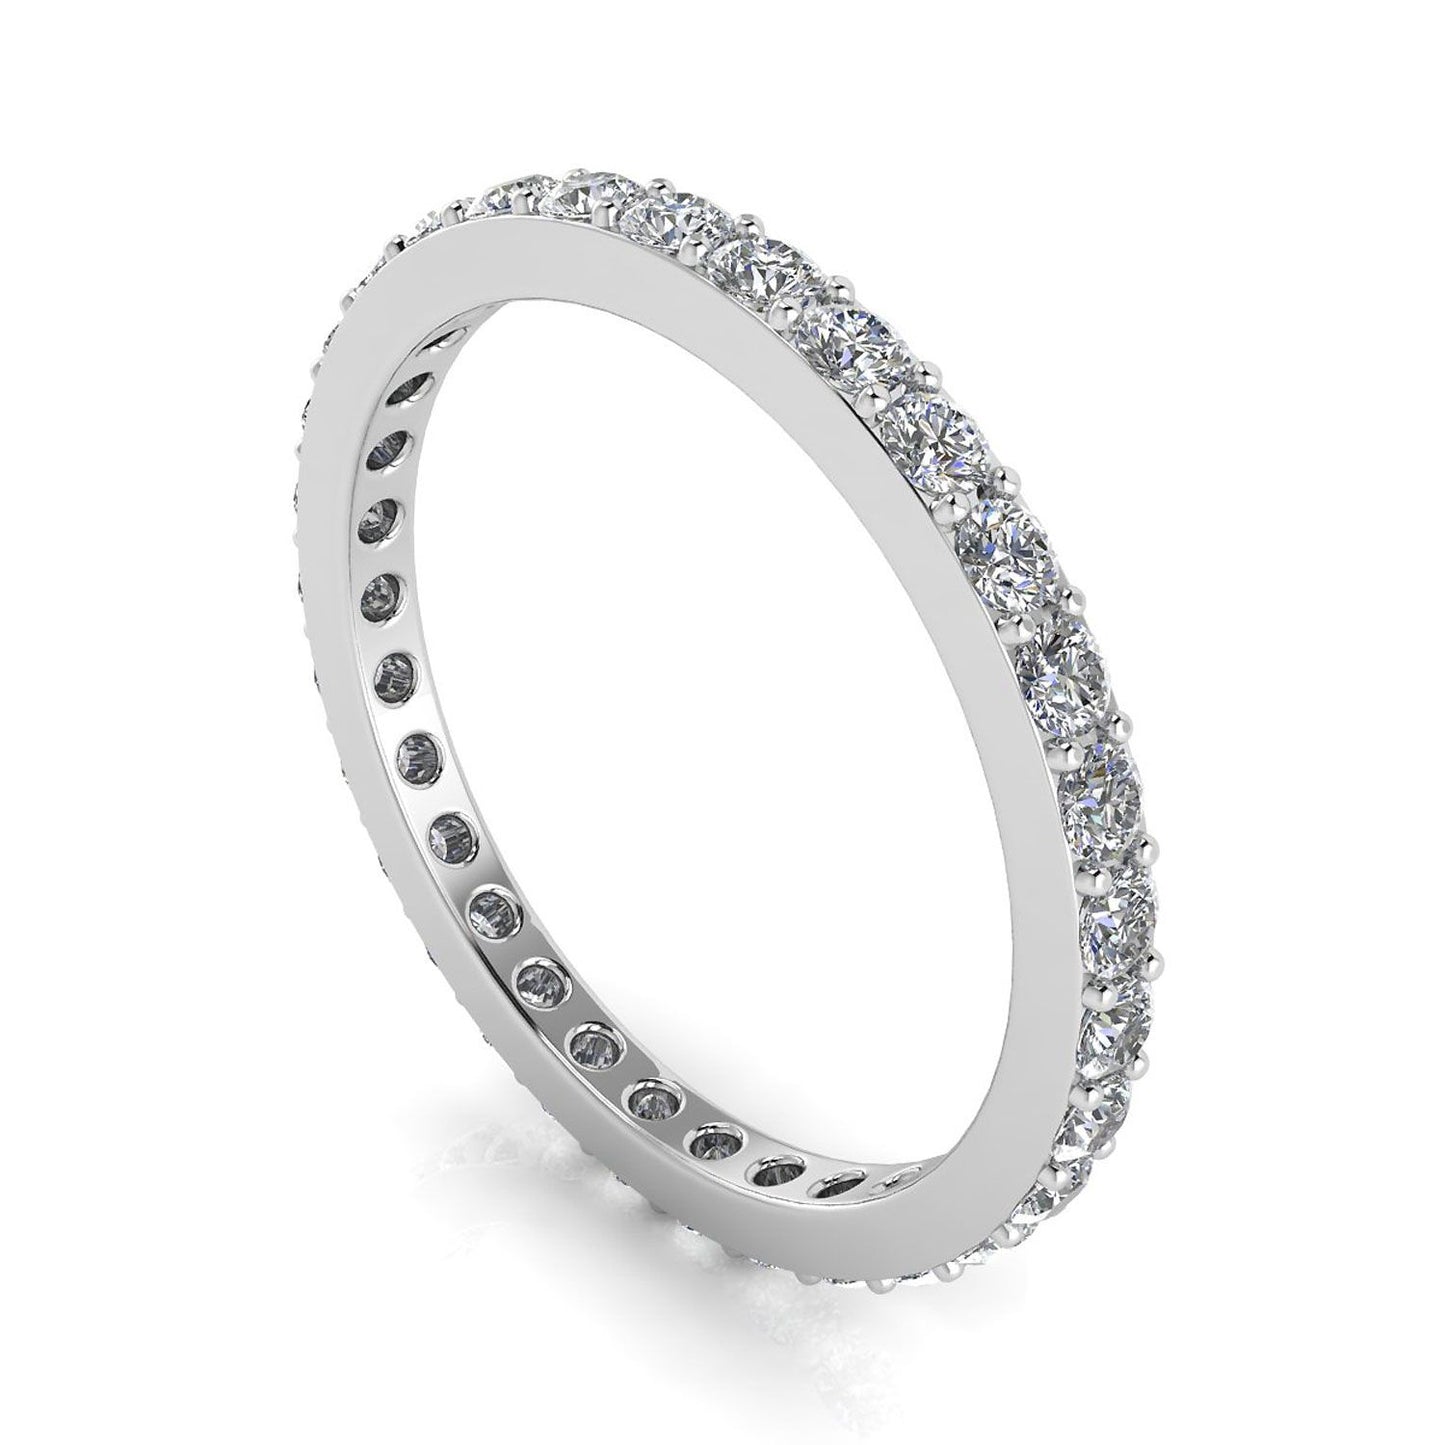 Round Brilliant Cut Diamond Pave Set Eternity Ring In 18k White Gold  (0.52ct. Tw.) Ring Size 9